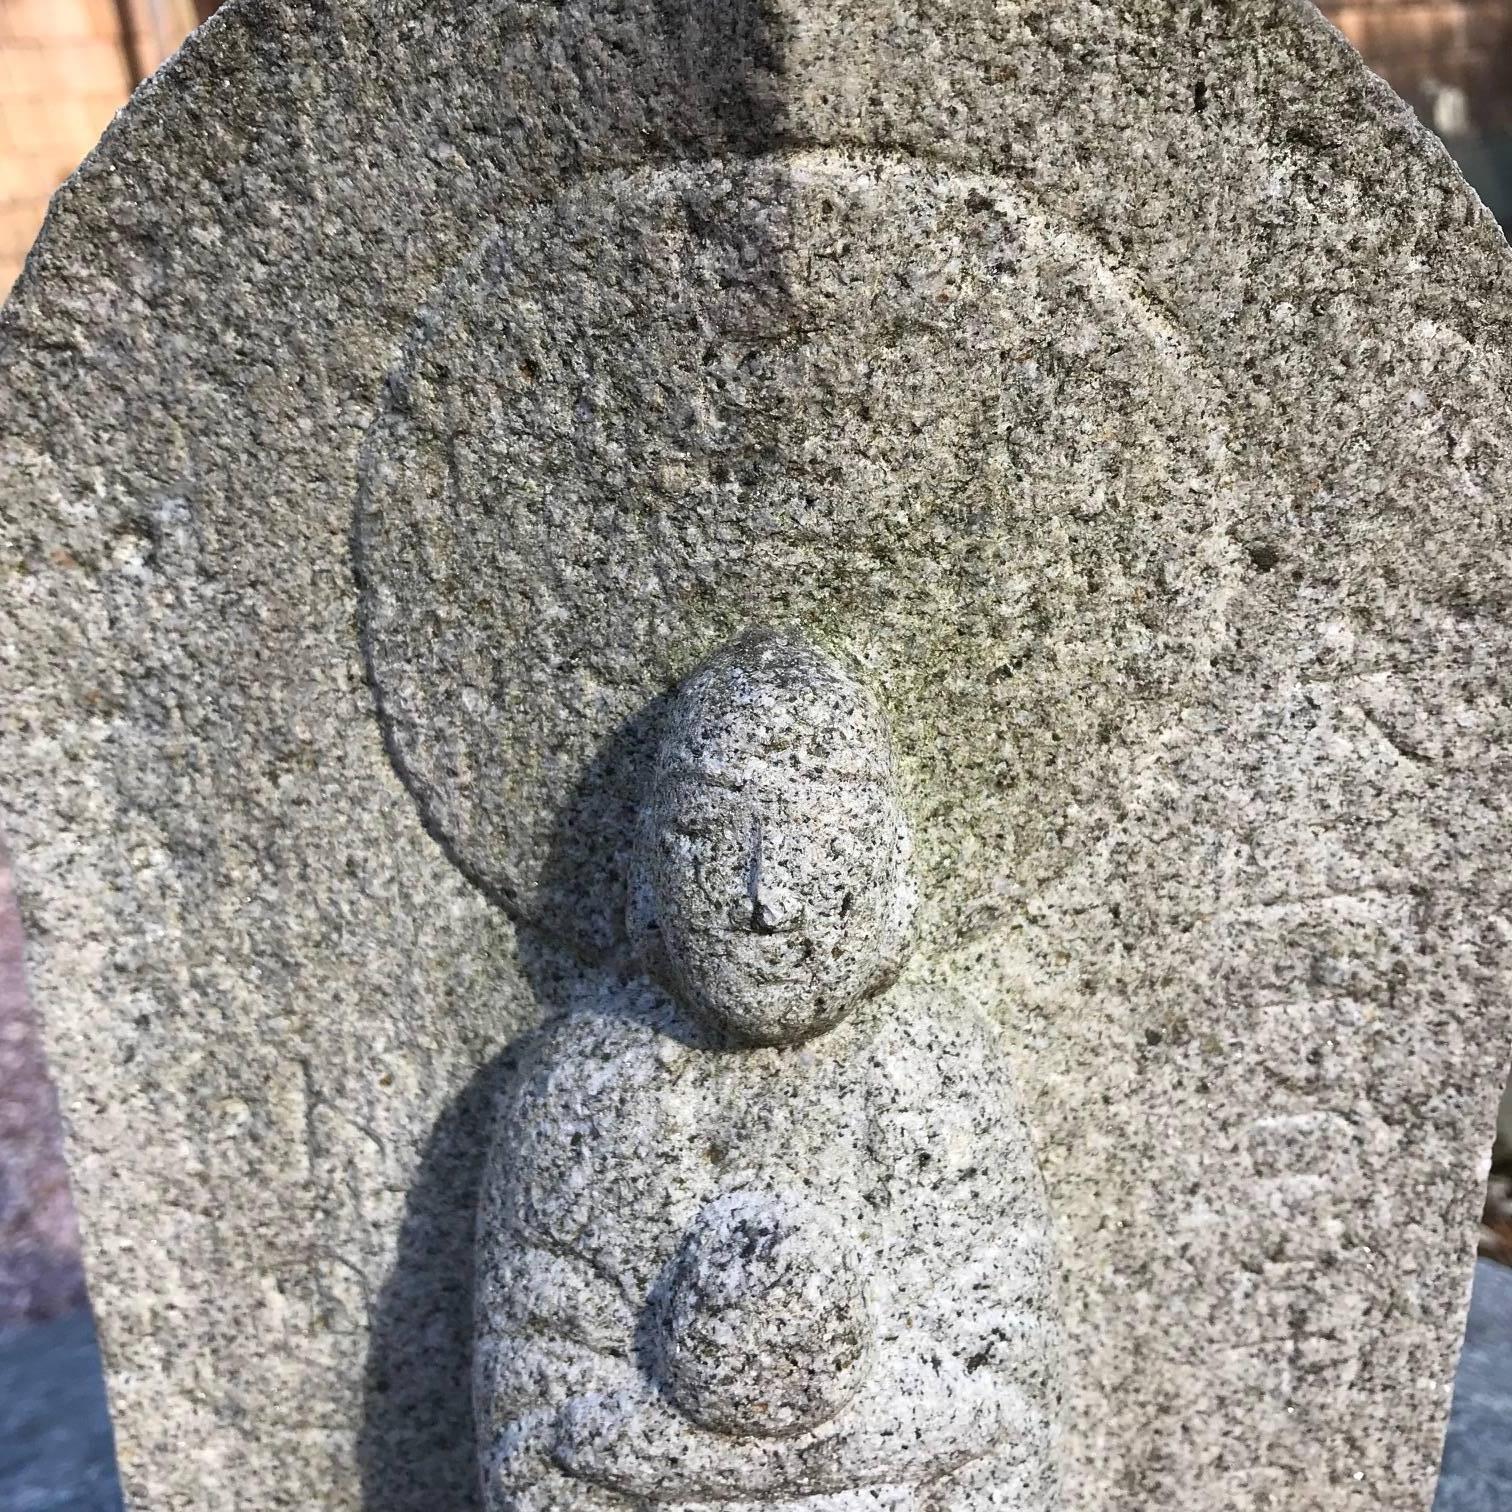 An uncommonly old Japanese Buddhist stone Jizo Bosatsu stands tall with well defined background mandorla and clutching his wish granting jewel or compassionate potion vessel. 

Sculpted from a gray-hued granite stone. Signed from the later Meiji